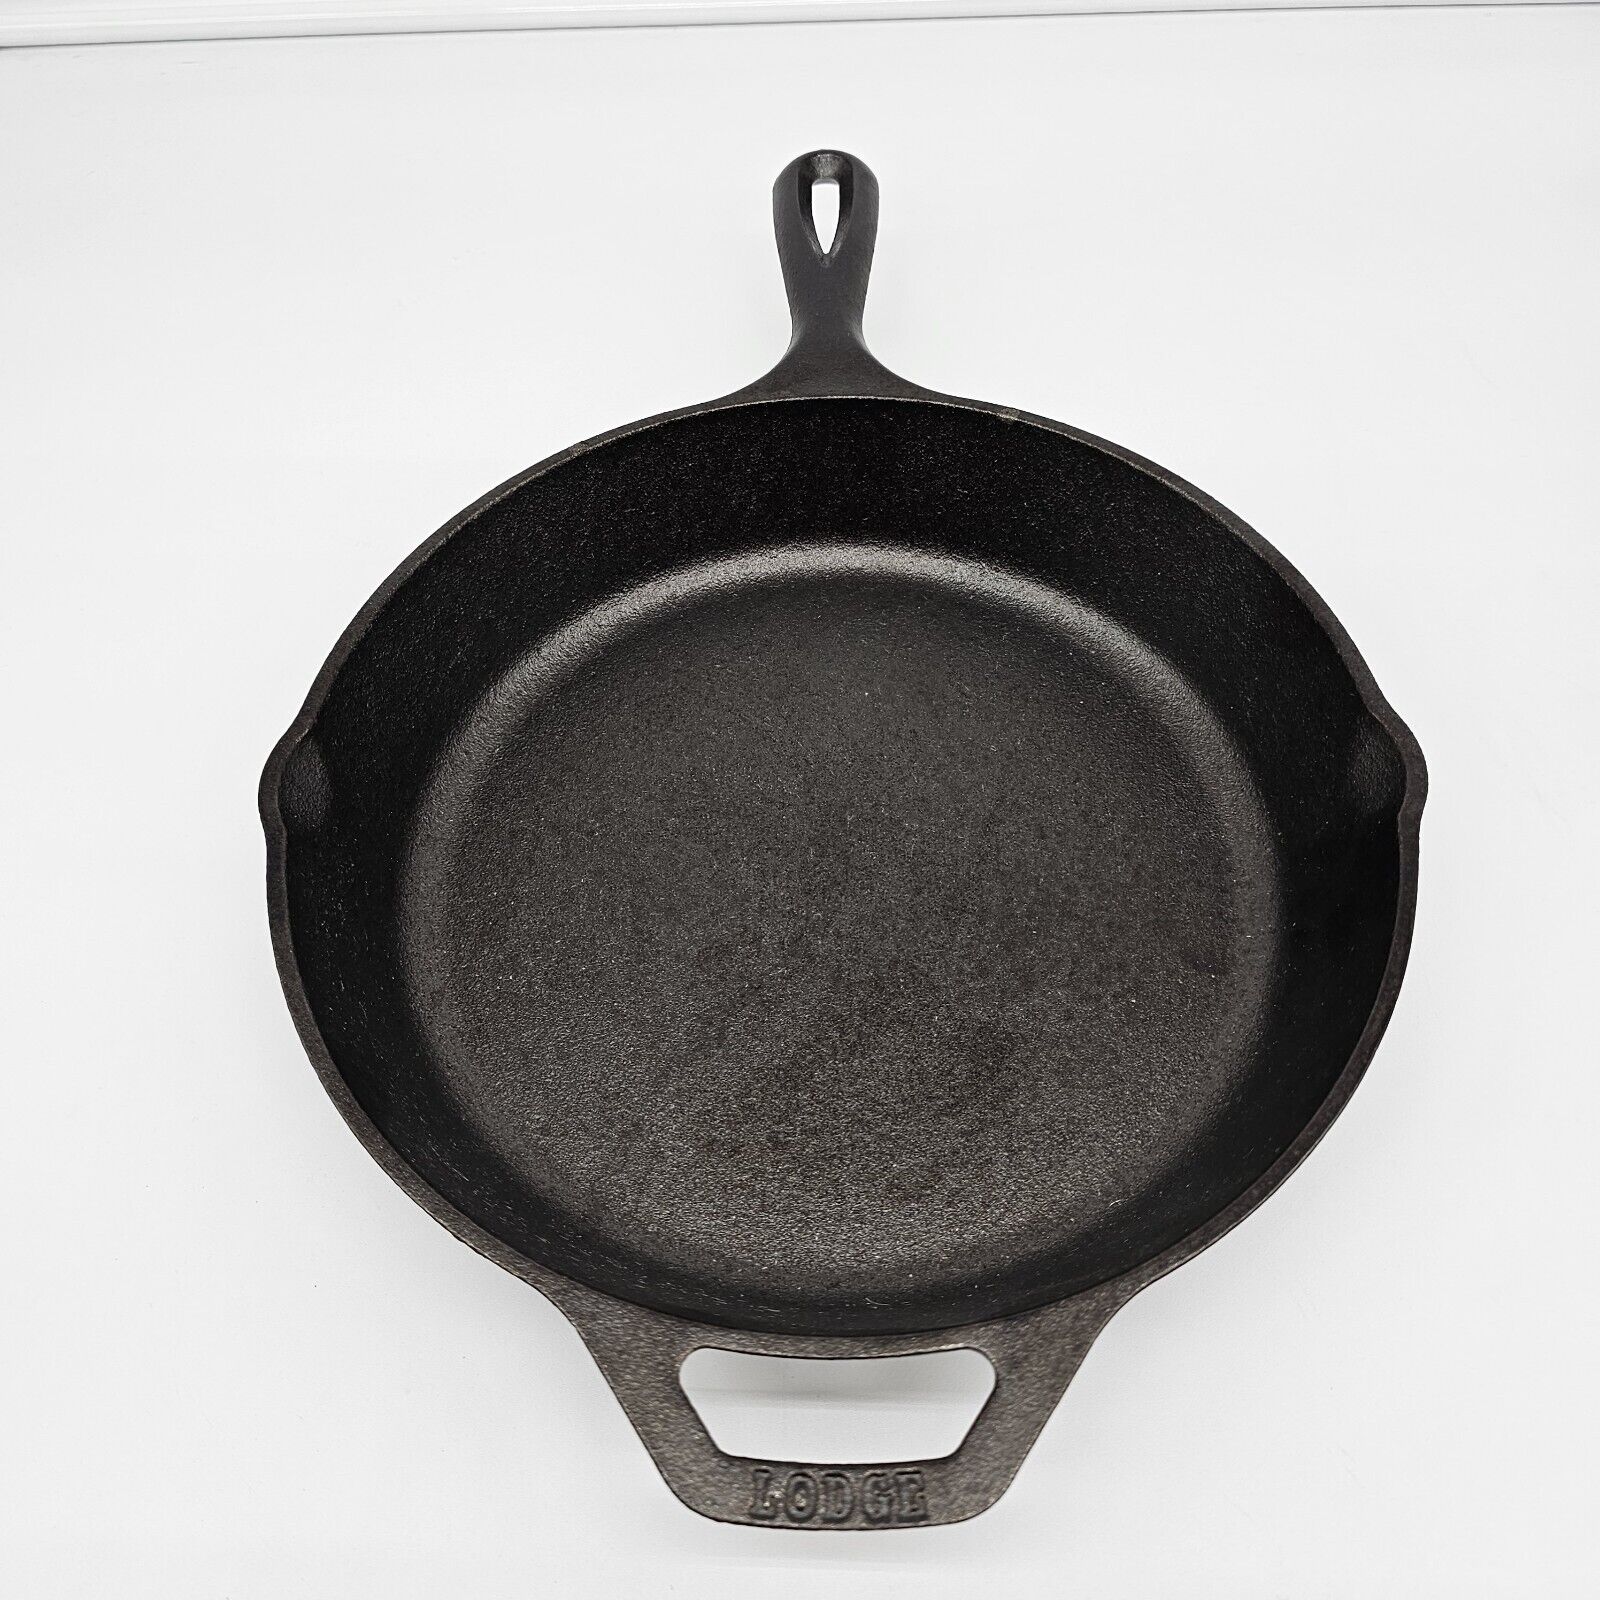 LODGE vintage 10 SK MADE IN THE USA cast IRON skillet